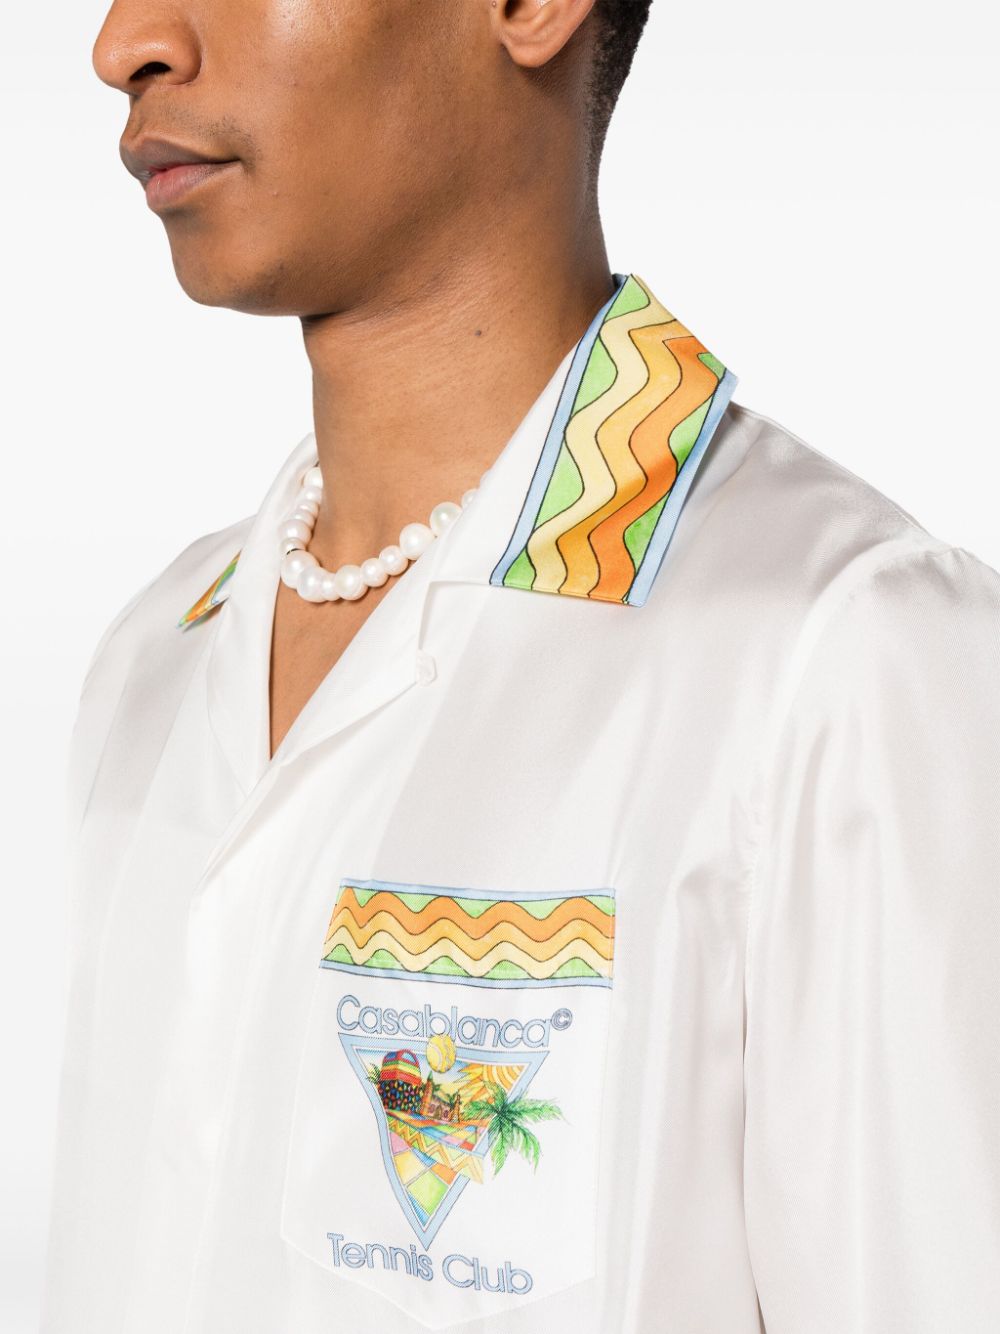 Afro Cubism Club shirt in satin